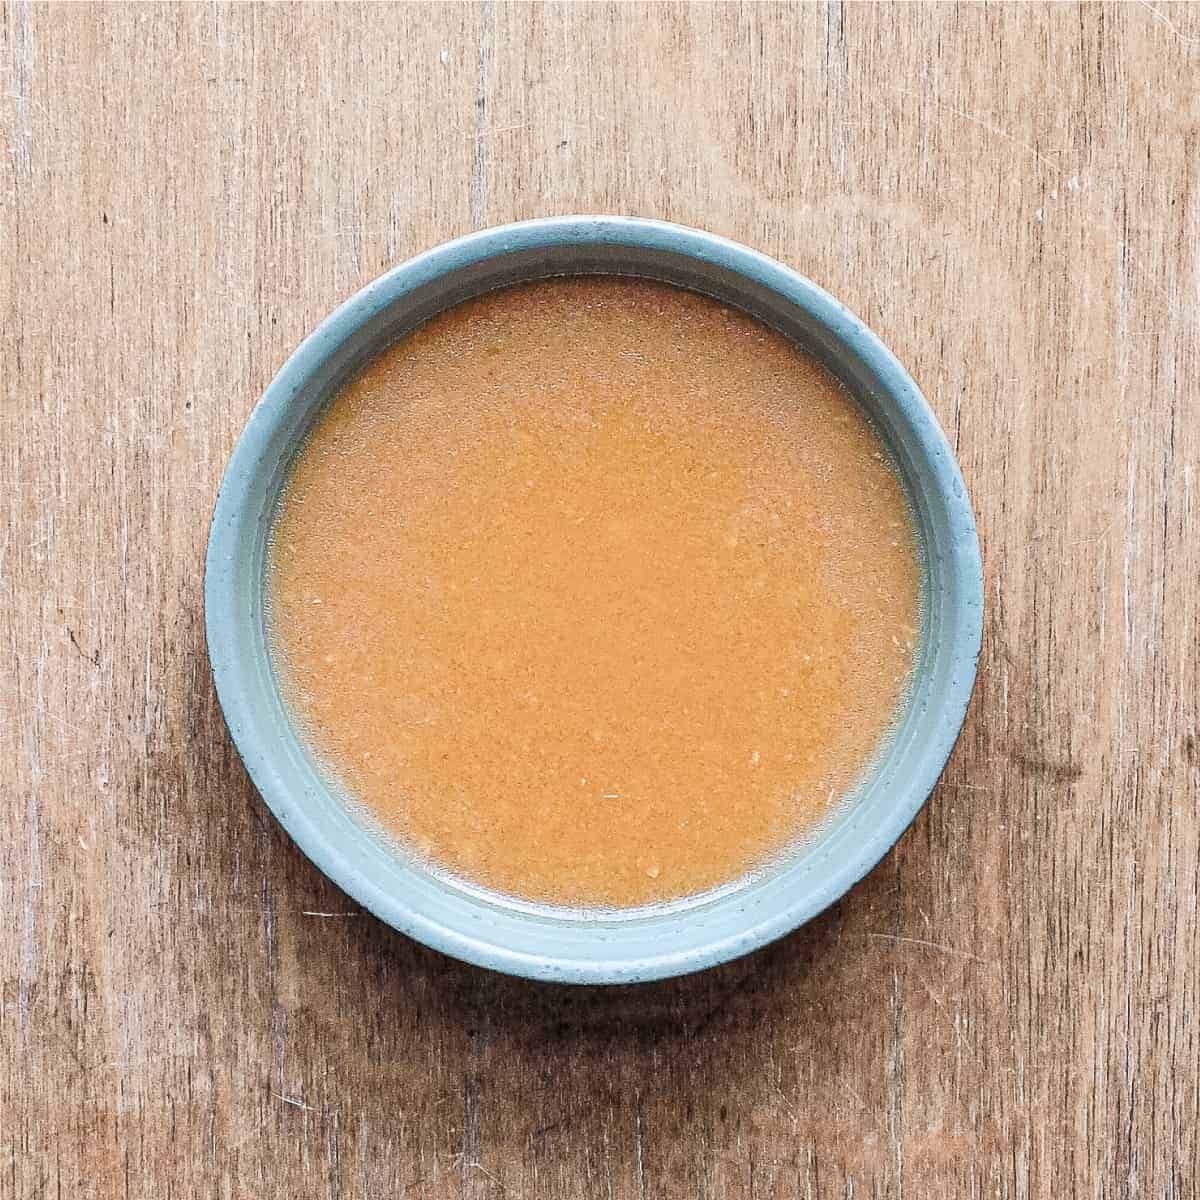 Miso dressing in a small bowl